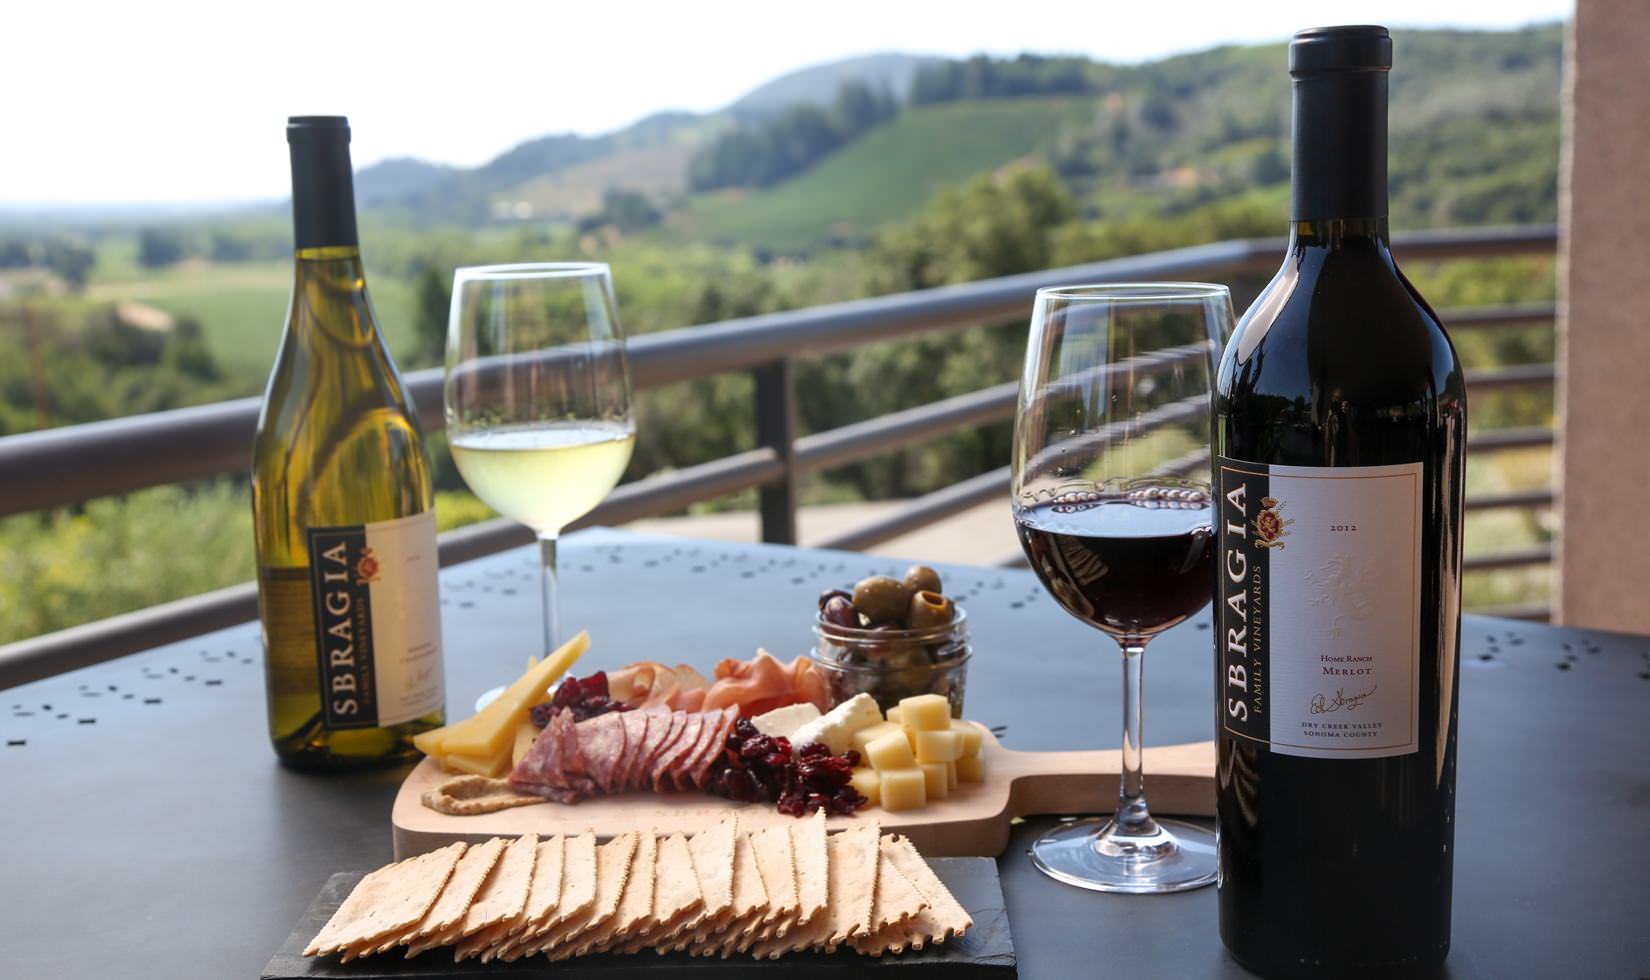 Sbragia Winery patio with cheese and charcuterie board - wineries with a view